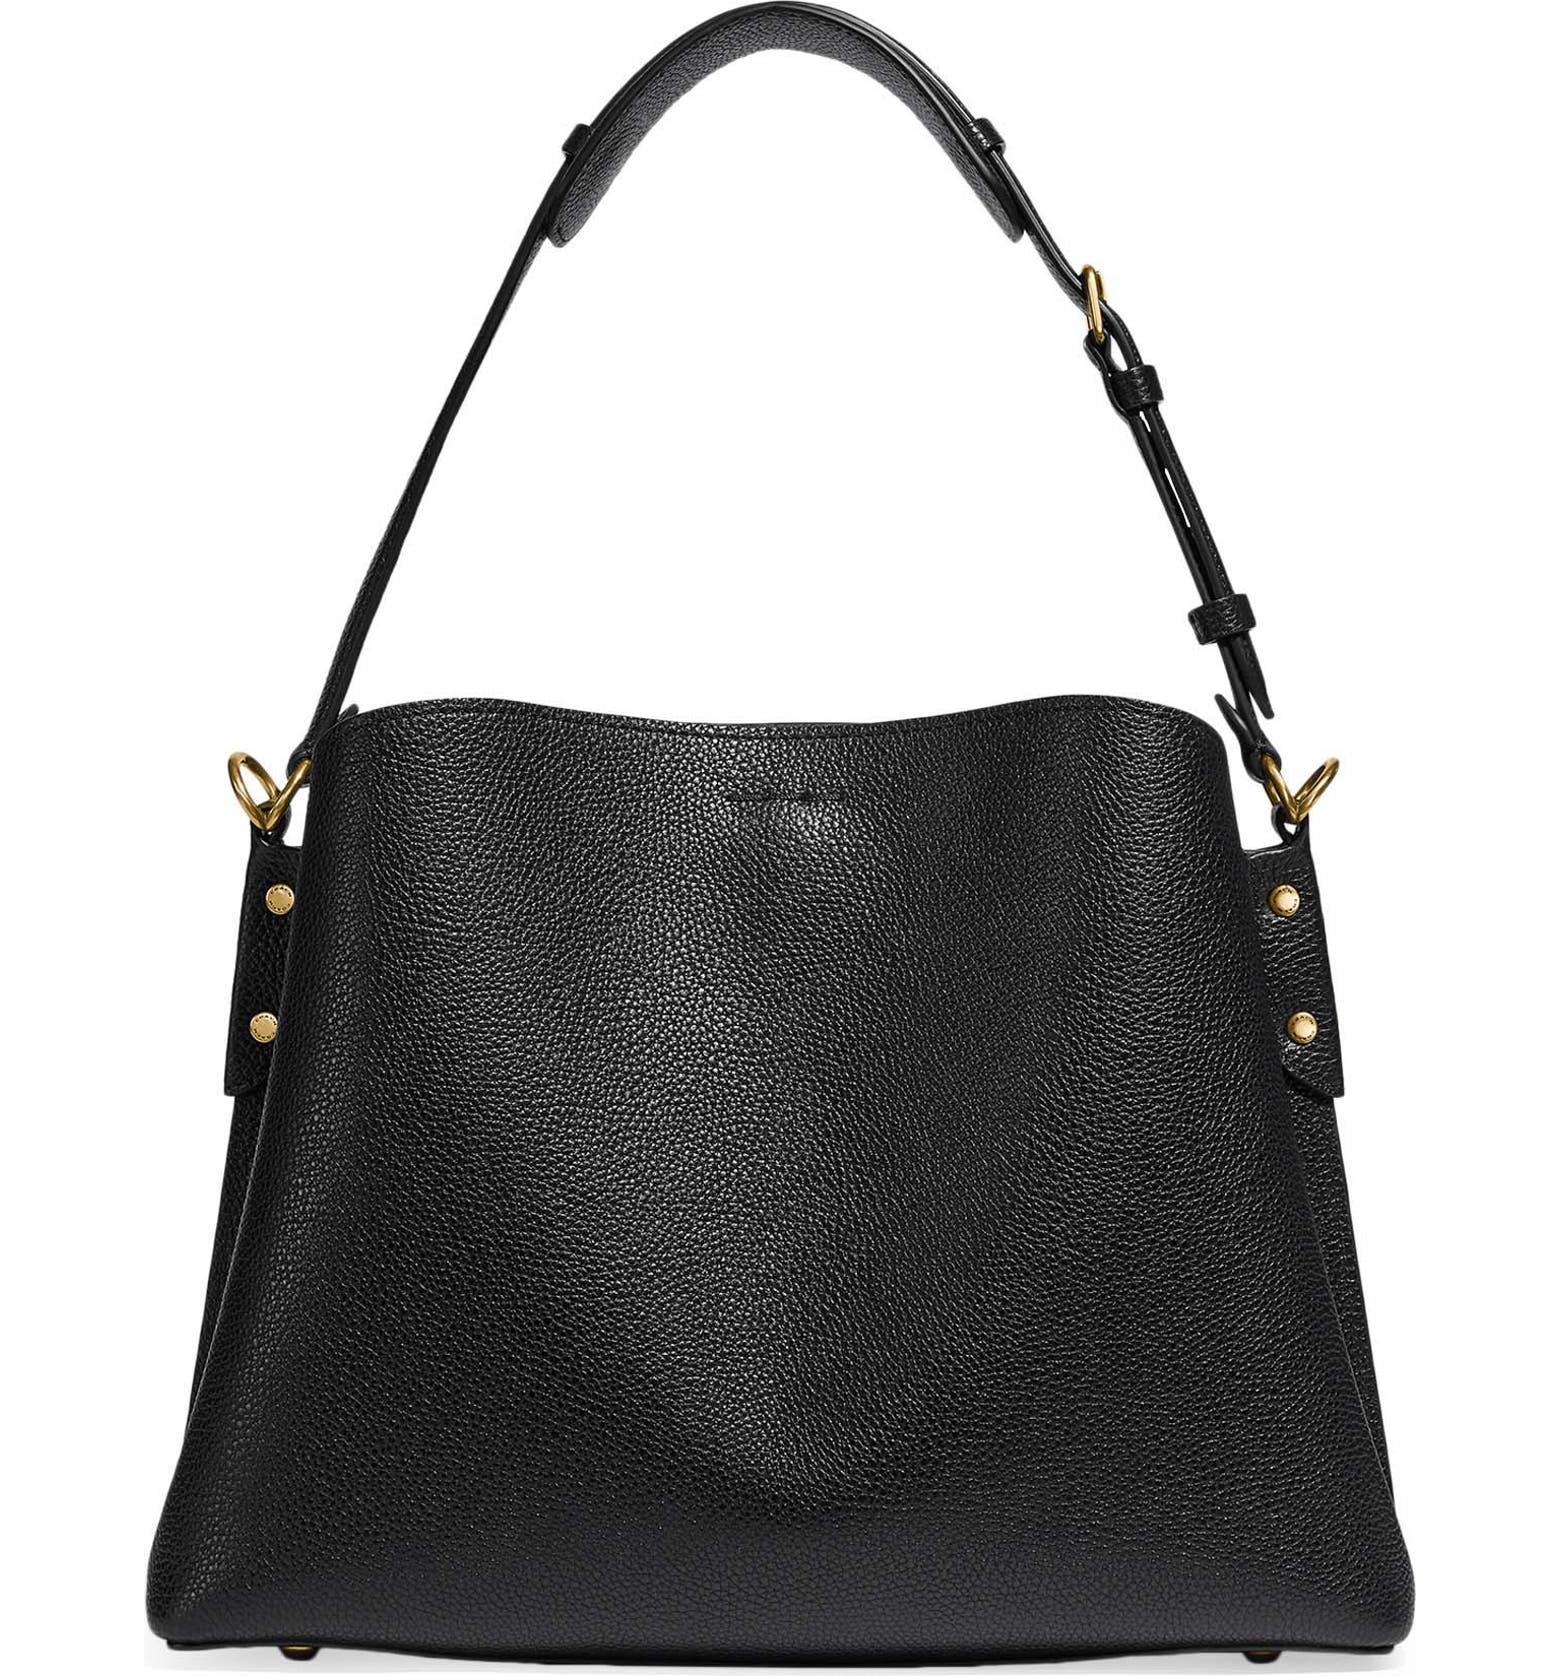 COACH Willow Pebble Leather Shoulder Bag | Nordstrom